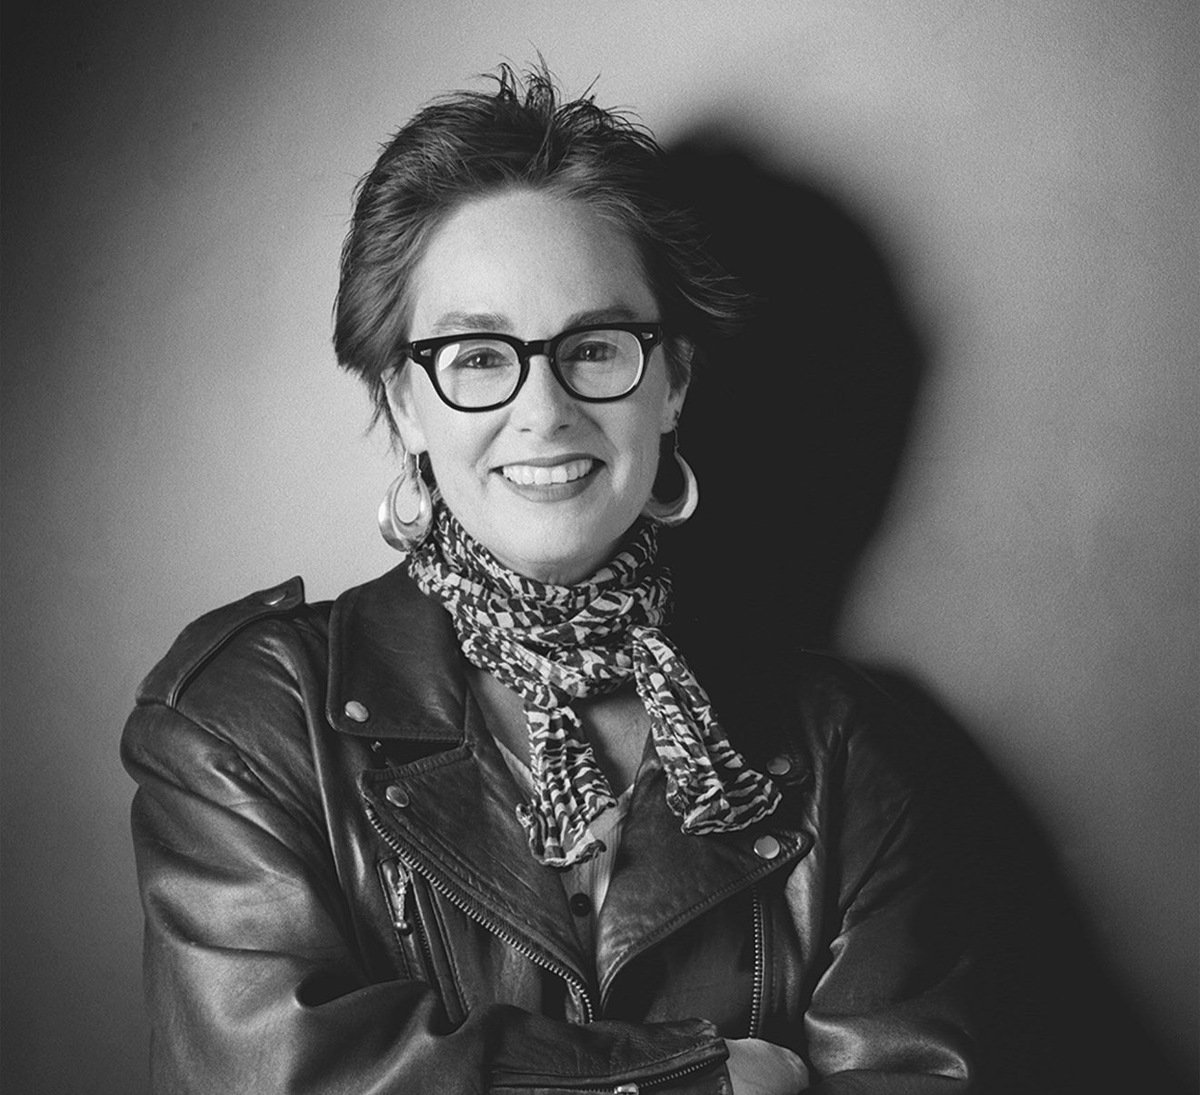 The late filmmaker/educator Judy Irola. Photo: Douglas Kirkland. Courtesy of American Society of Cinematographers. In this black-and-white portrait of Judy Irola, she has short brunette hair and glasses, she is wearing a leather jacket and she is posing with her arms crossed across her chest.